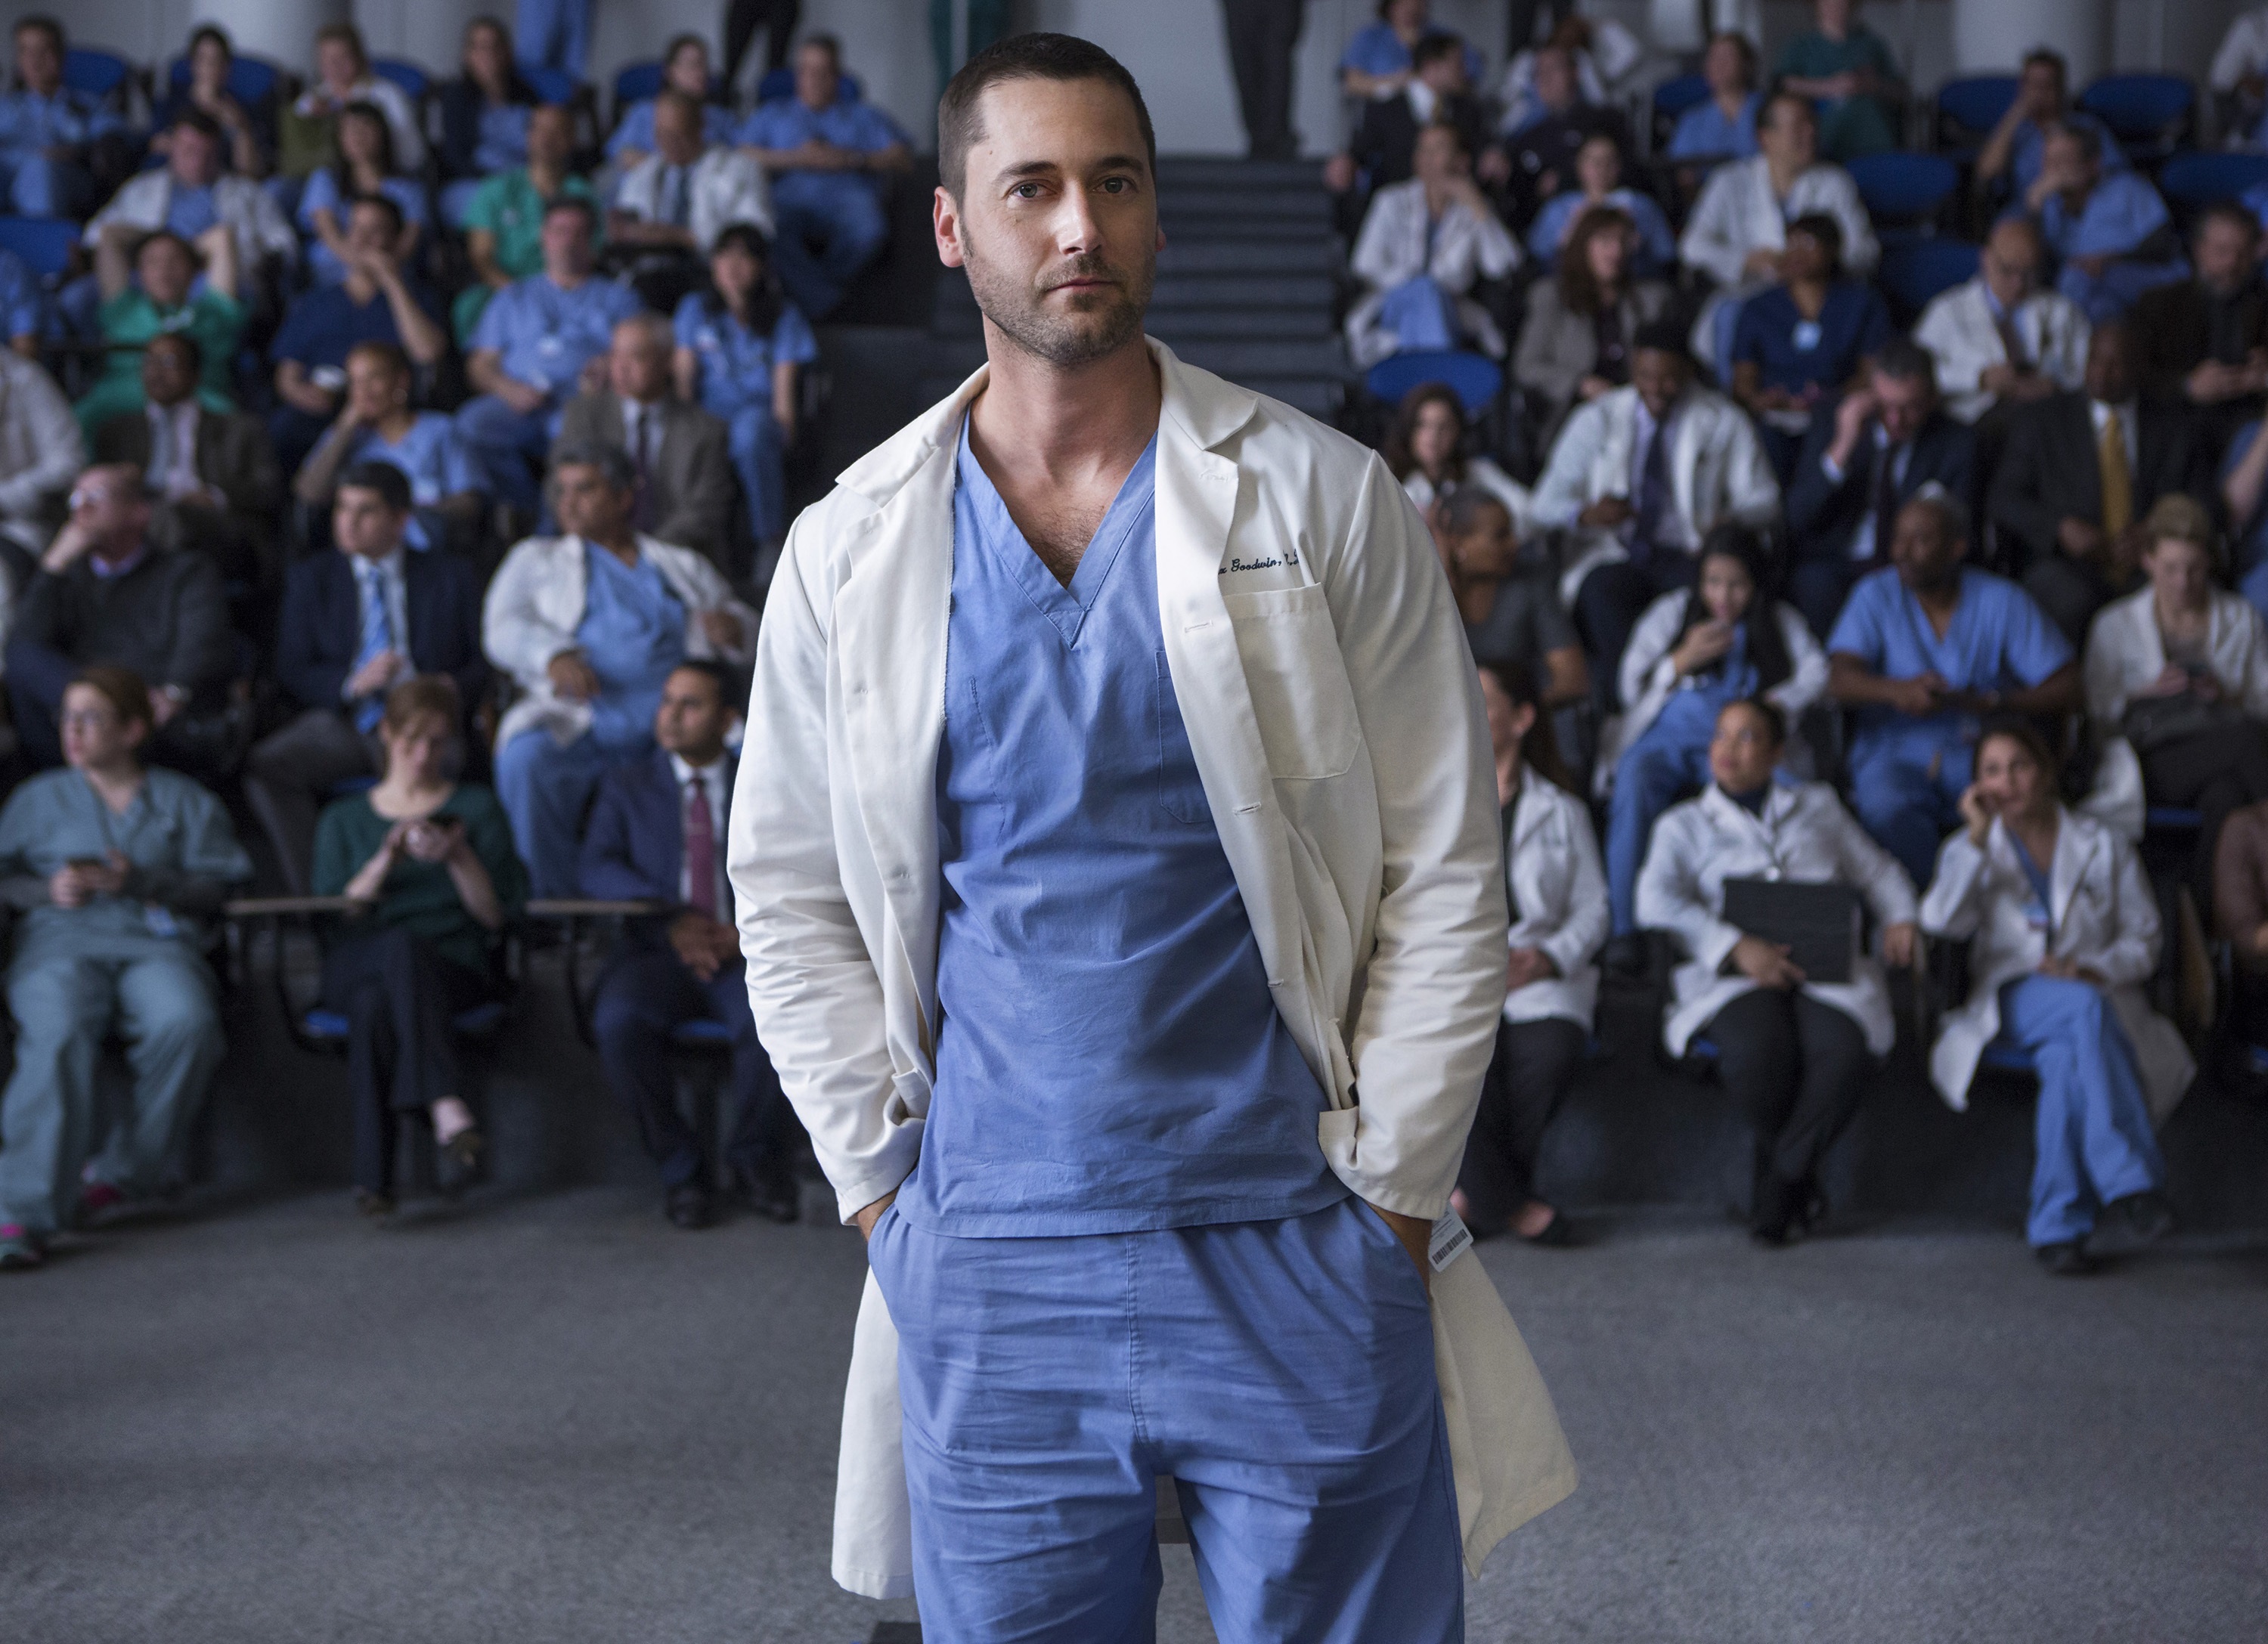 'New Amsterdam' will end with 13 episodes of season 5 on NBC